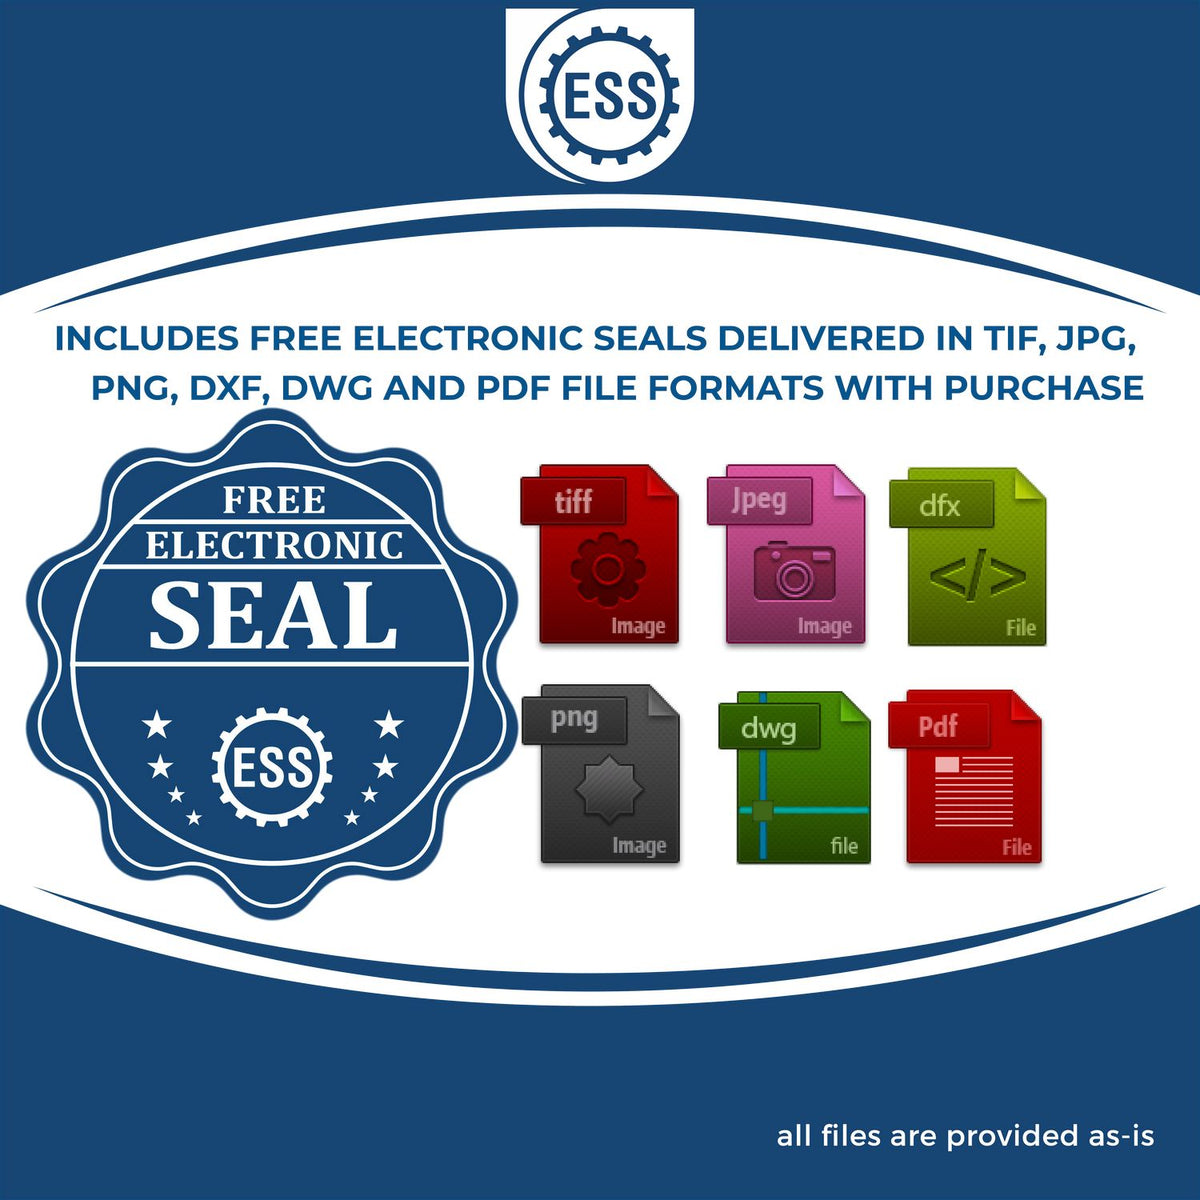 An infographic for the free electronic seal for the Extended Long Reach New Jersey Architect Seal Embosser illustrating the different file type icons such as DXF, DWG, TIF, JPG and PNG.